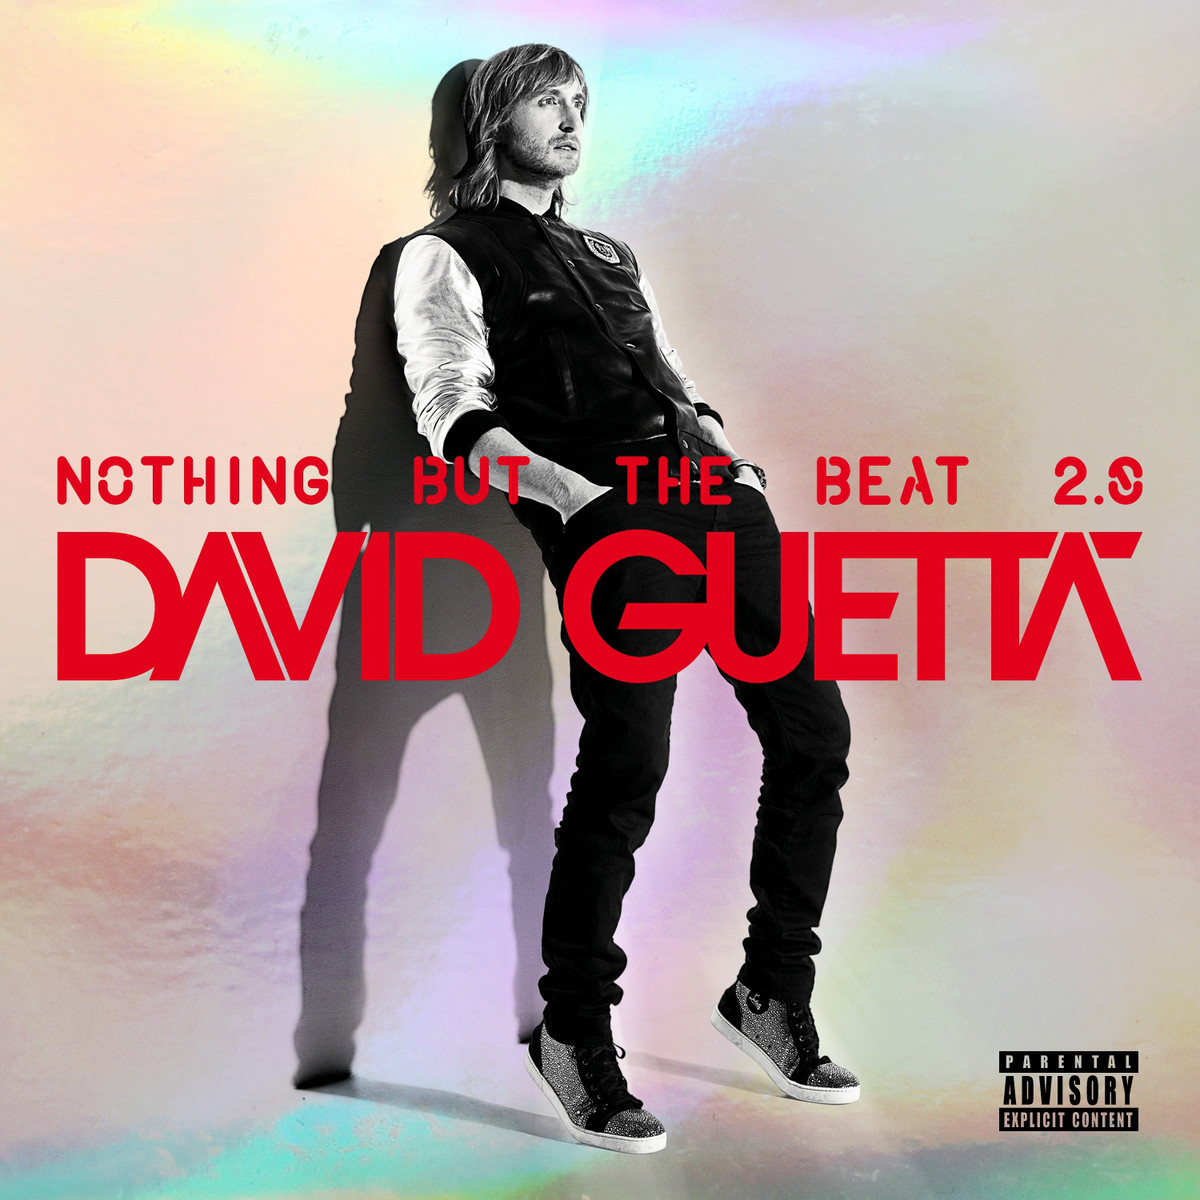 David-Guetta-Nothing-But-the-Beat-2.0-cd-cover.png